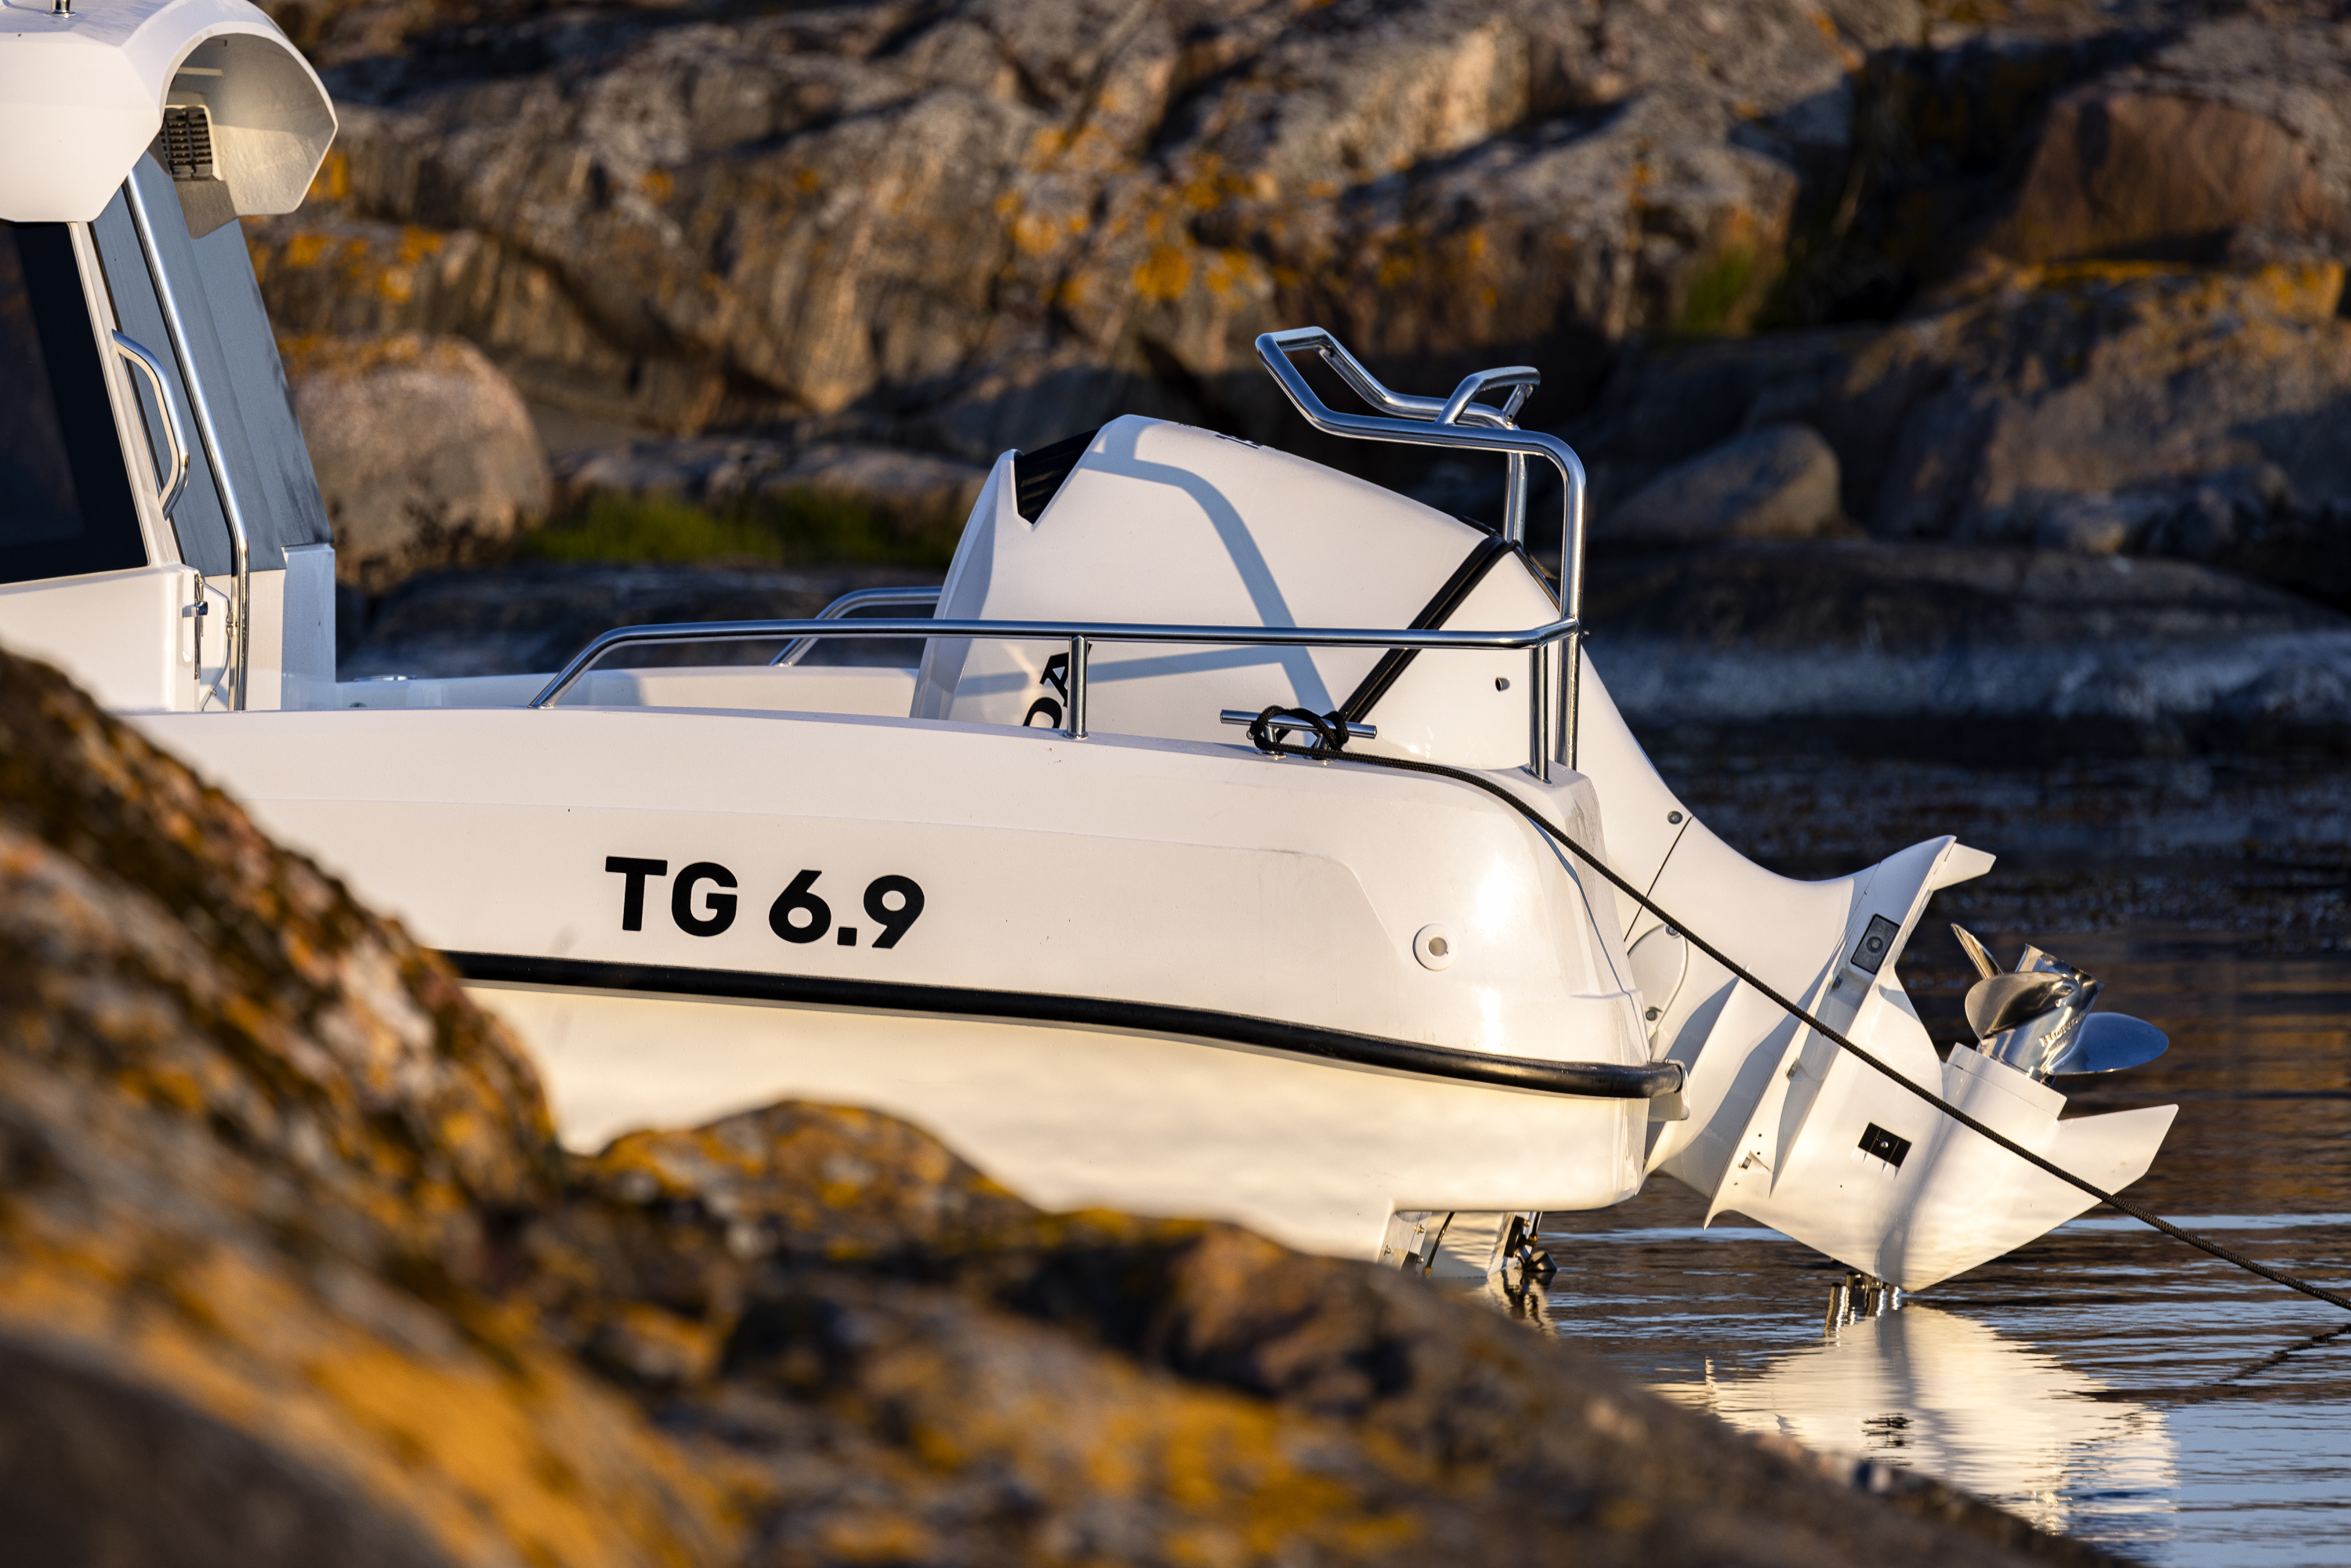 The stern part of the TG 6.9 cabin boat drenched in evening sun. White Honda outboard engine.